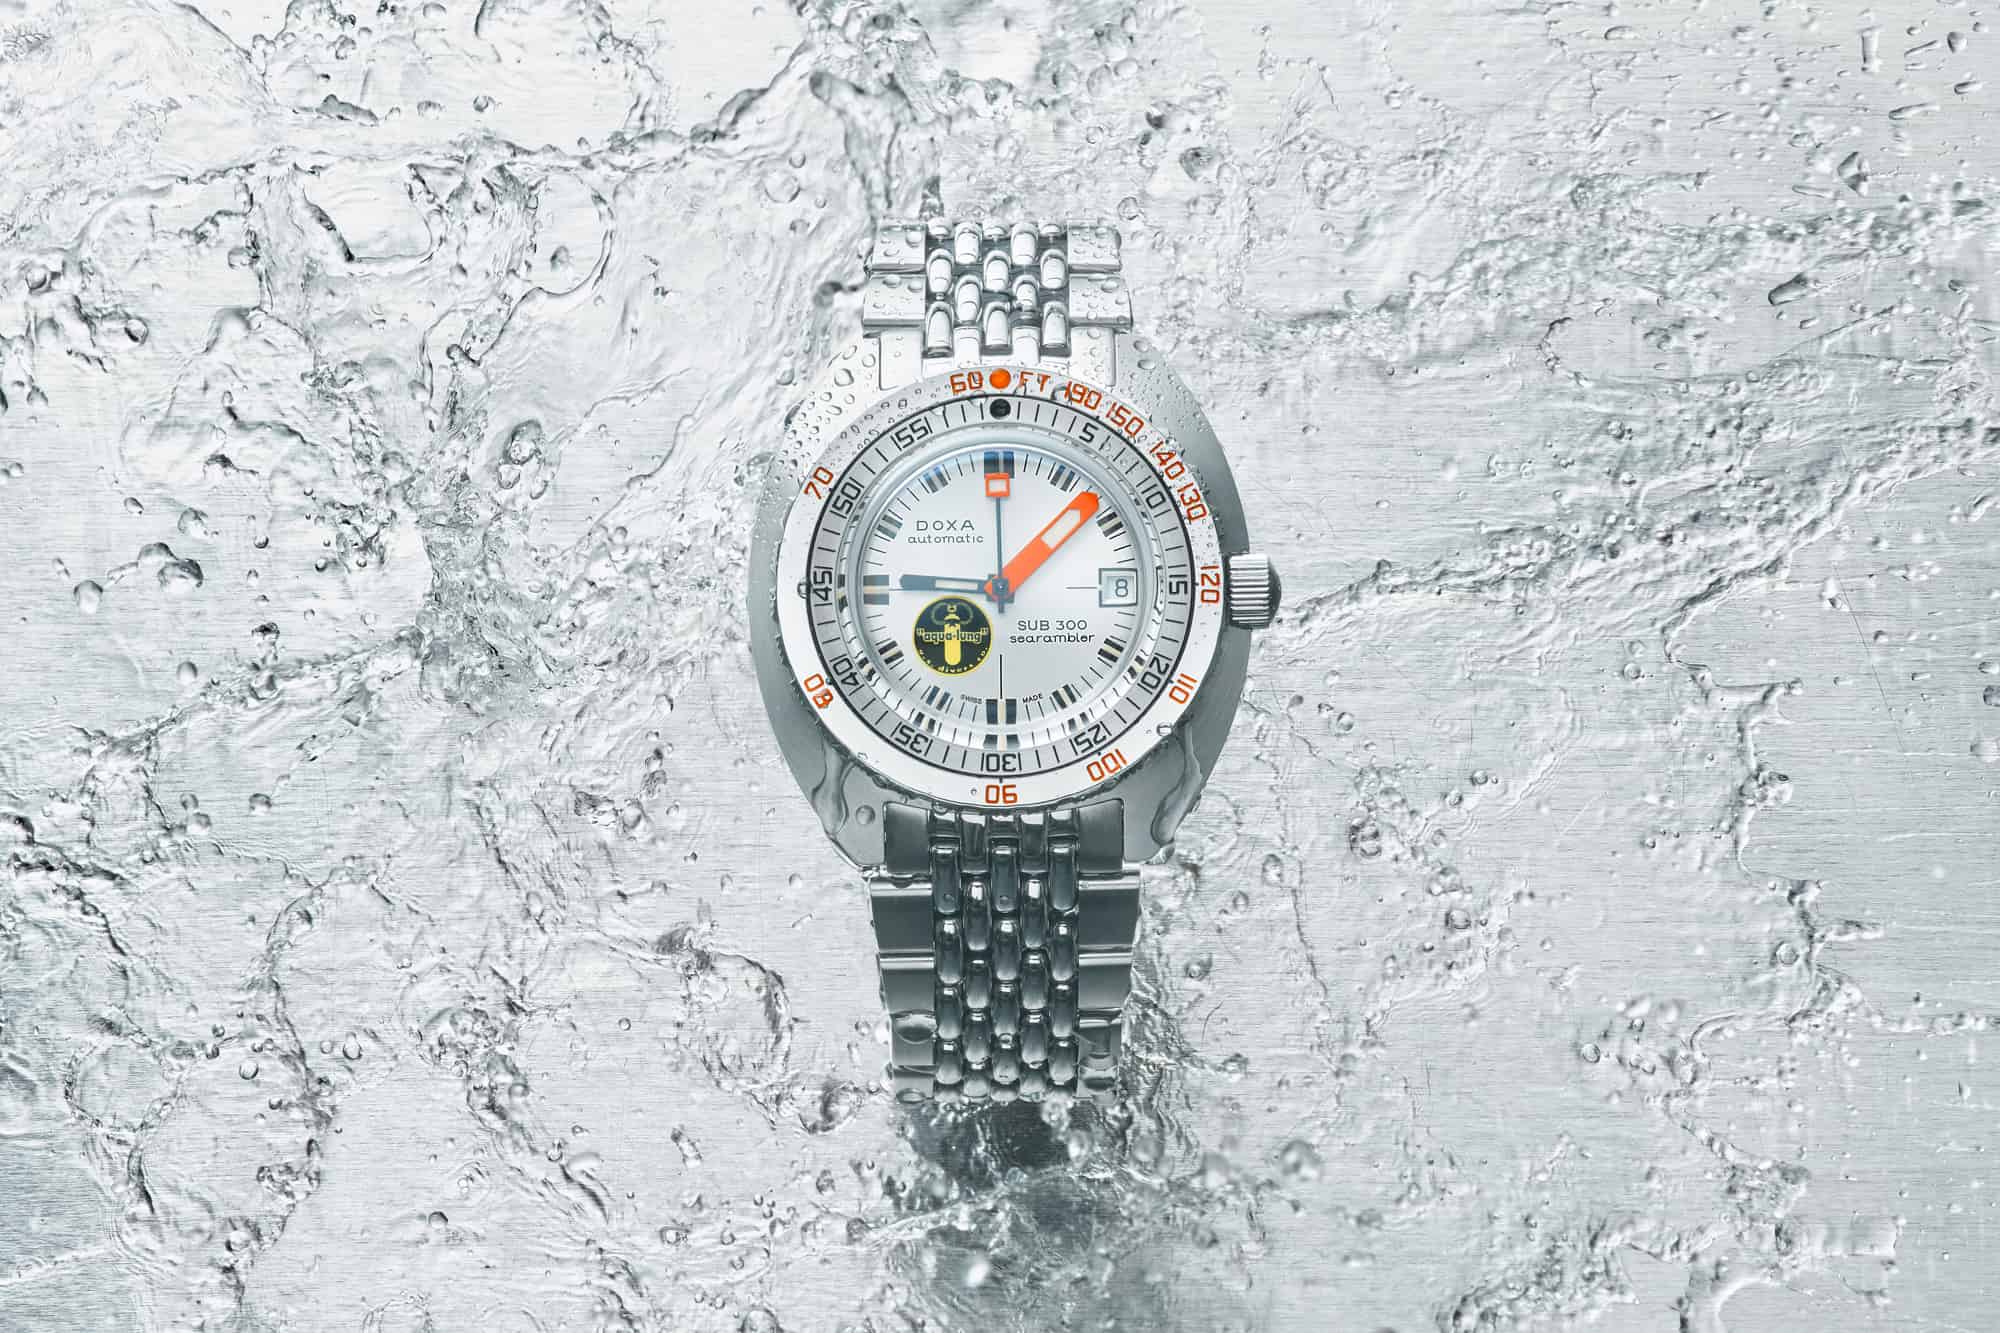 Introducing the DOXA SUB 300 Searambler “Silver Lung,” the Latest Revival From the Storied Dive Brand